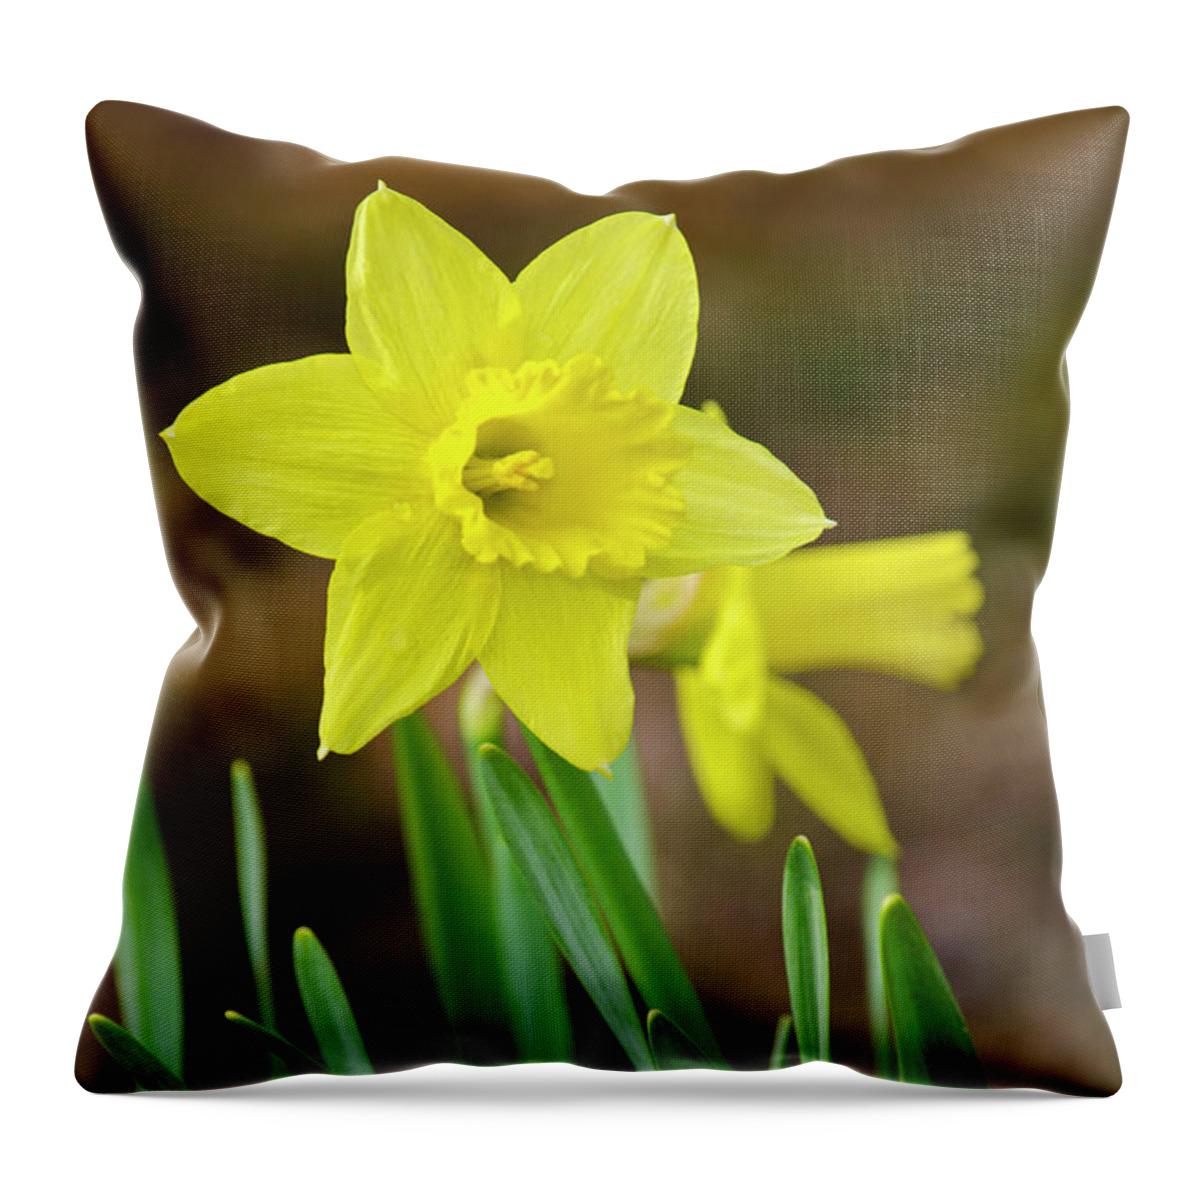 Daffodil Throw Pillow featuring the photograph Beautiful Daffodil Flower by Christina Rollo